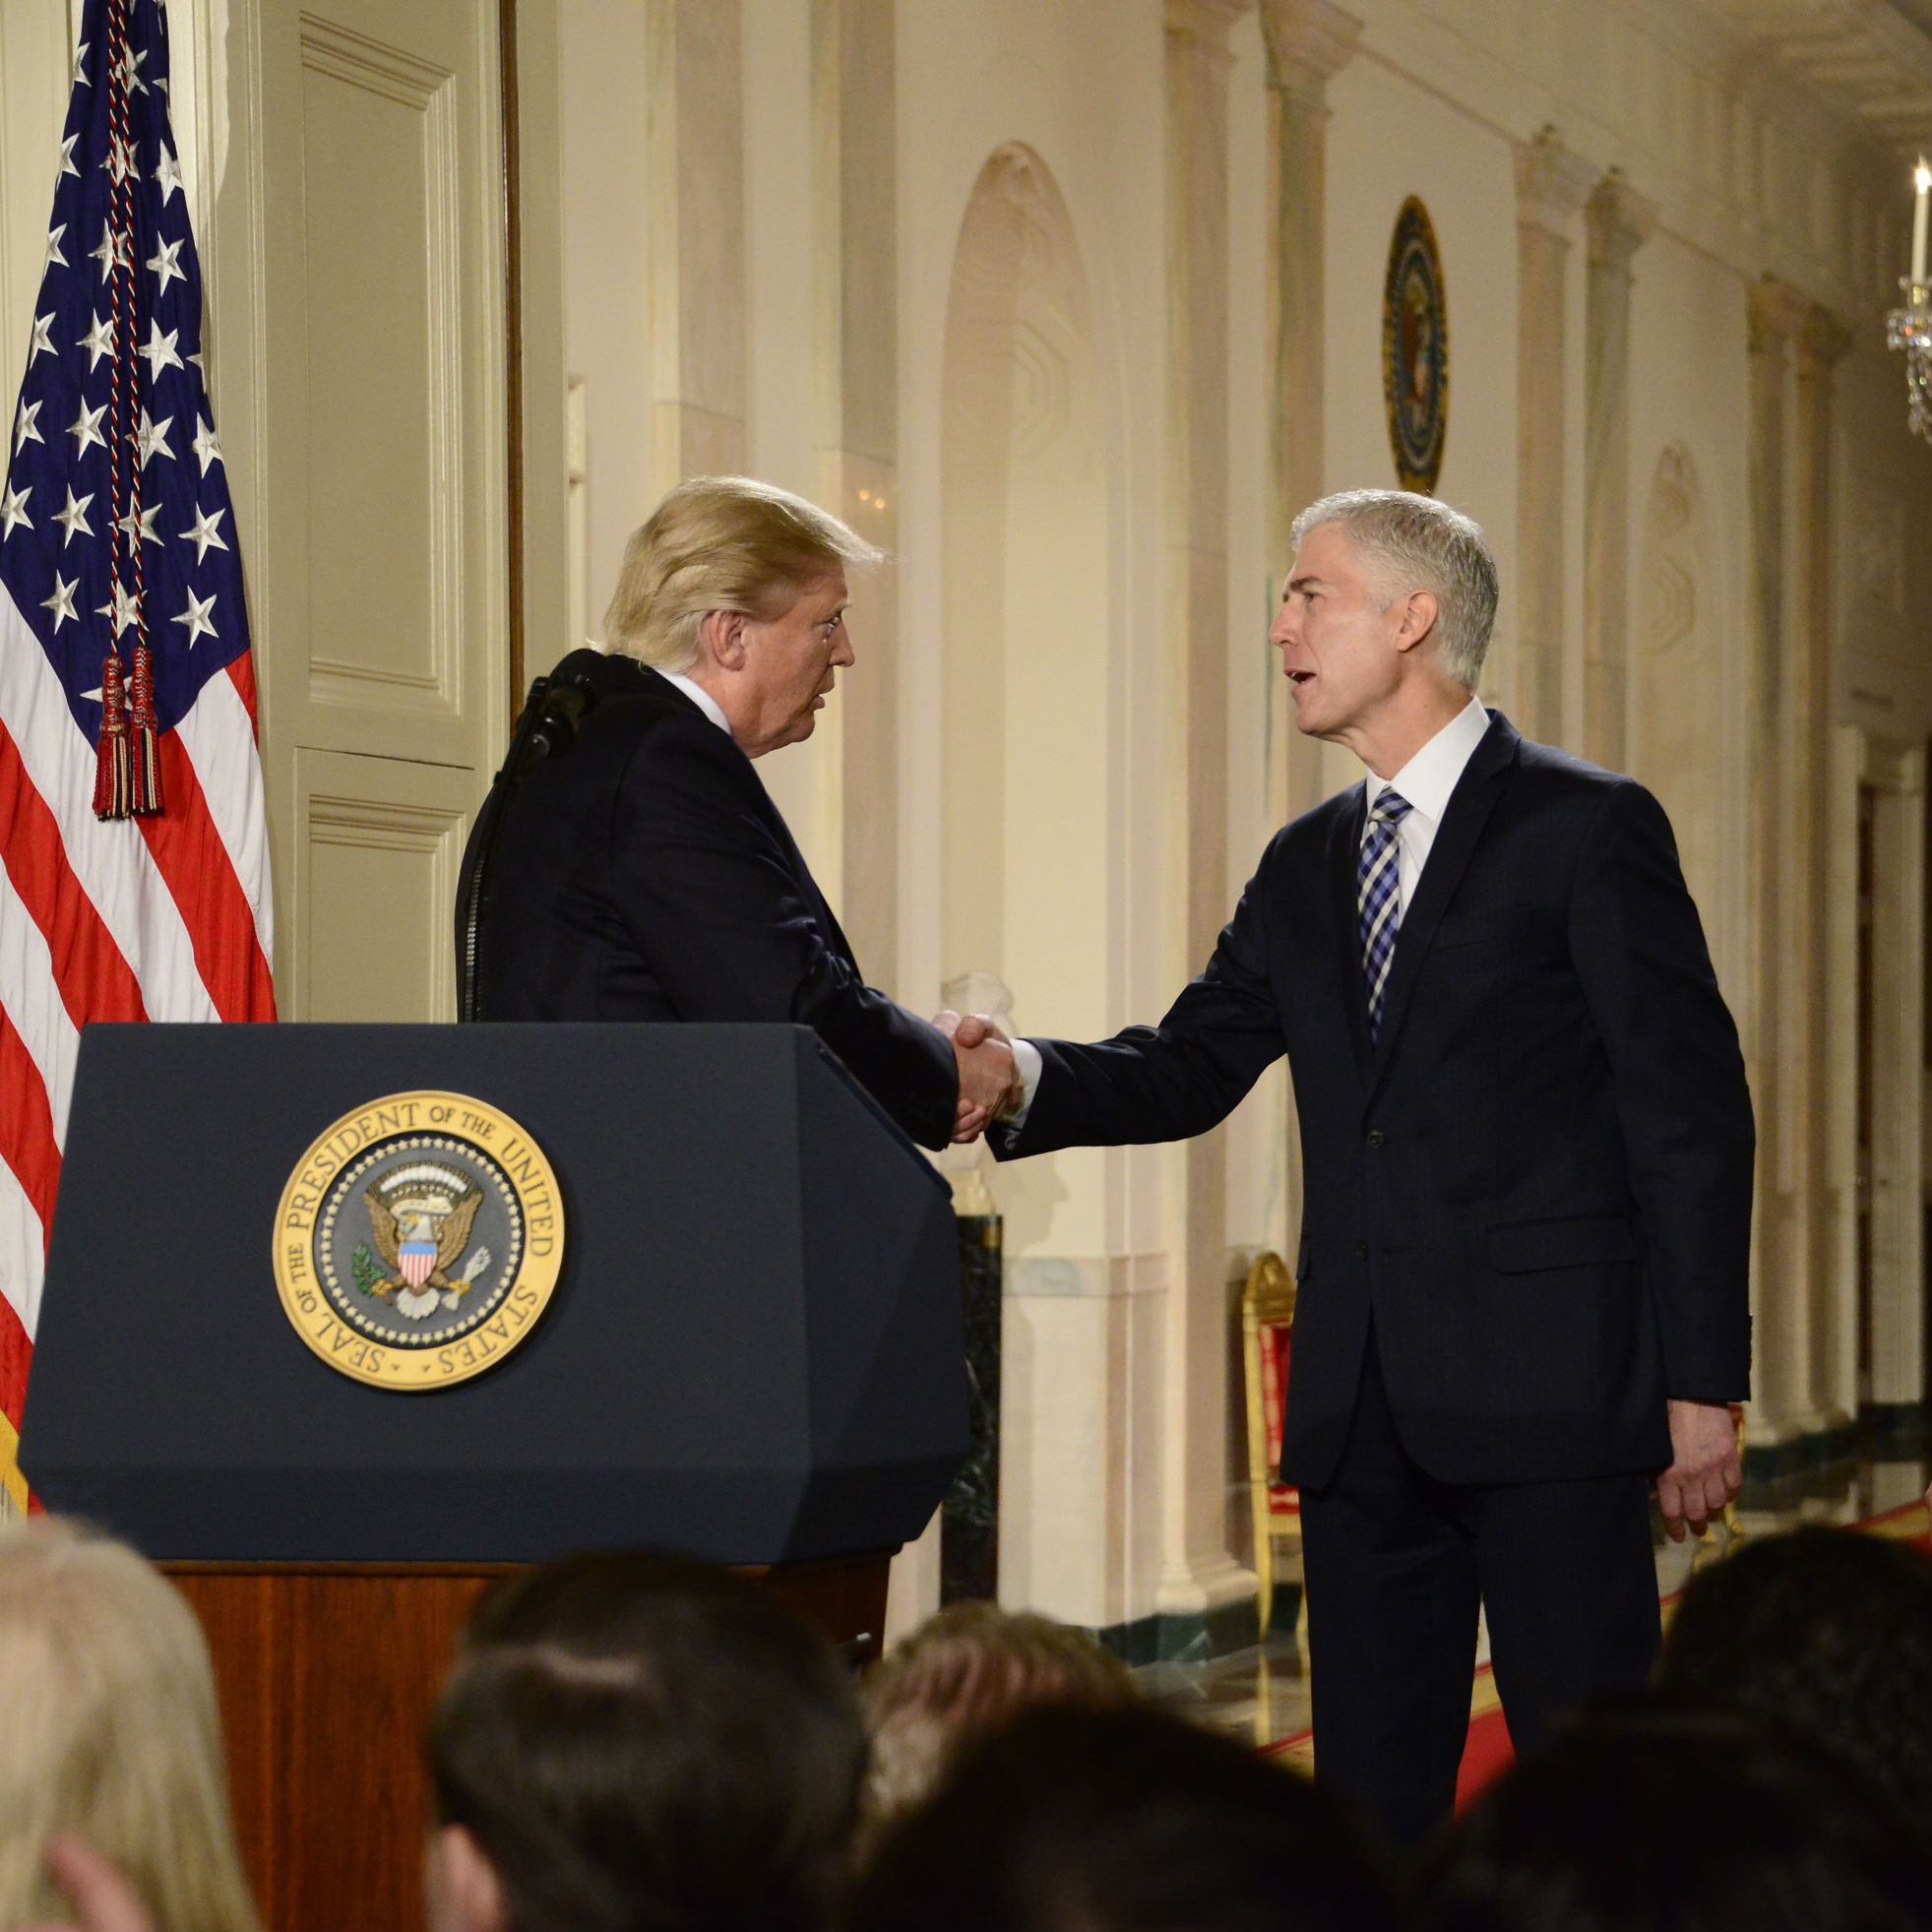 Trump nominates Episcopalian known to back religious rights as US Supreme Court Judge